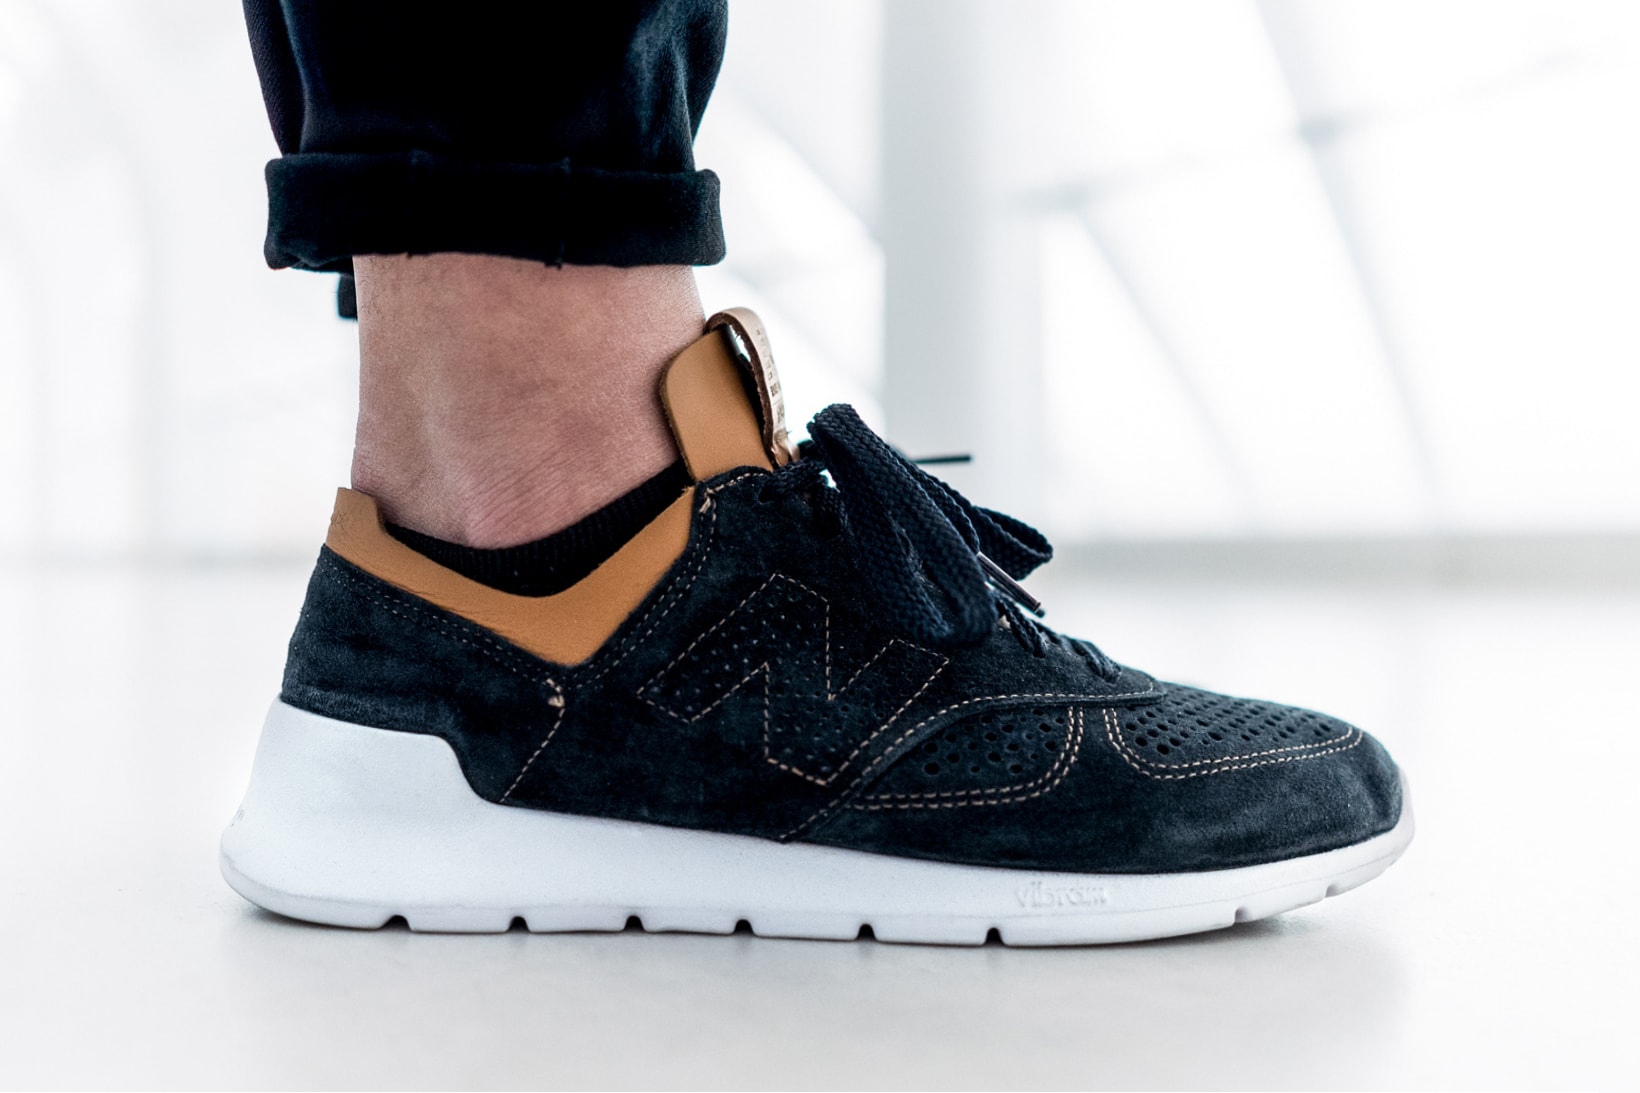 New Balance MADE 1978 Lifestyle Sneakers